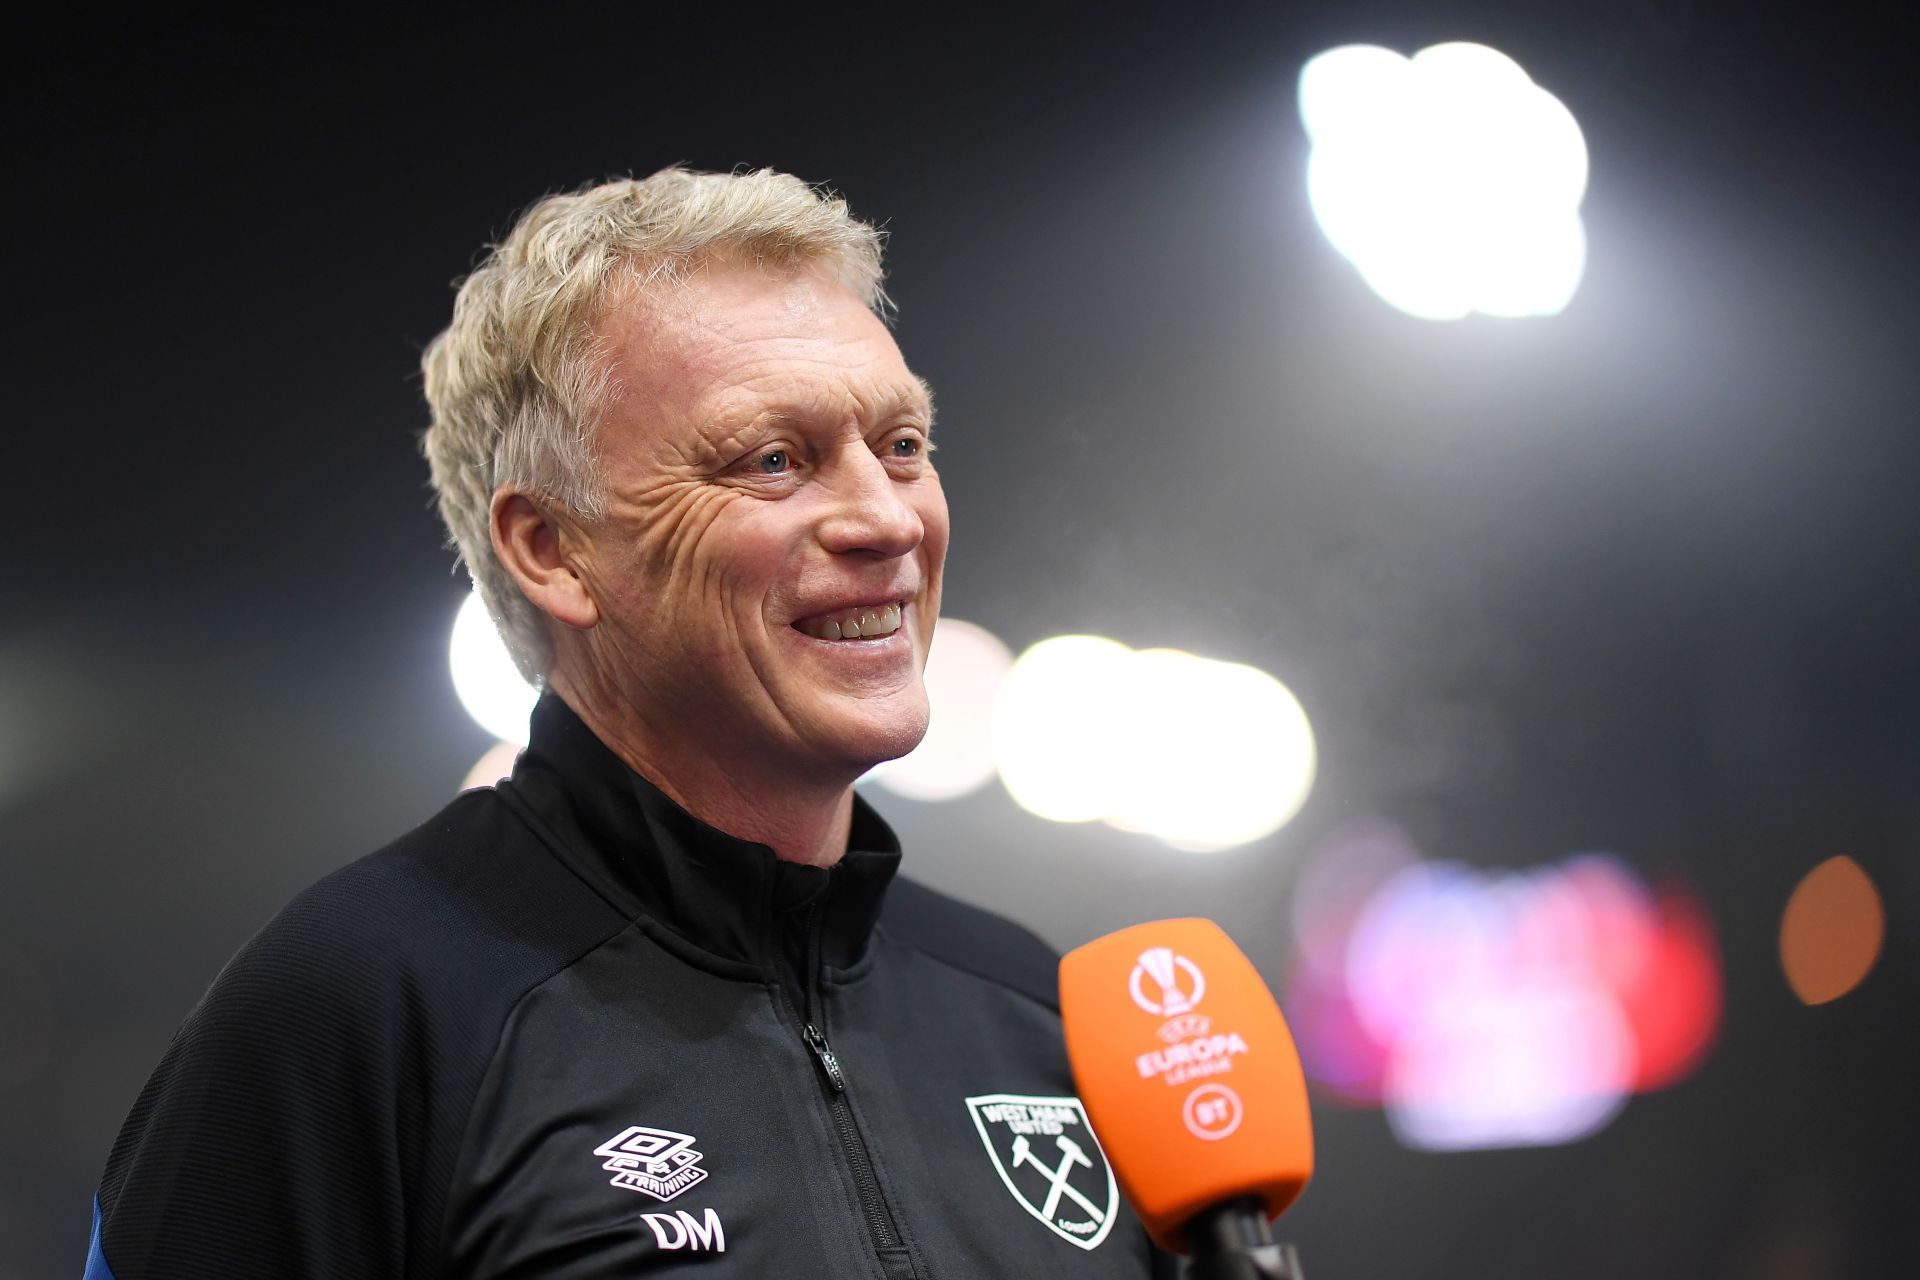 David Moyes has exceeded expectations at West Ham.